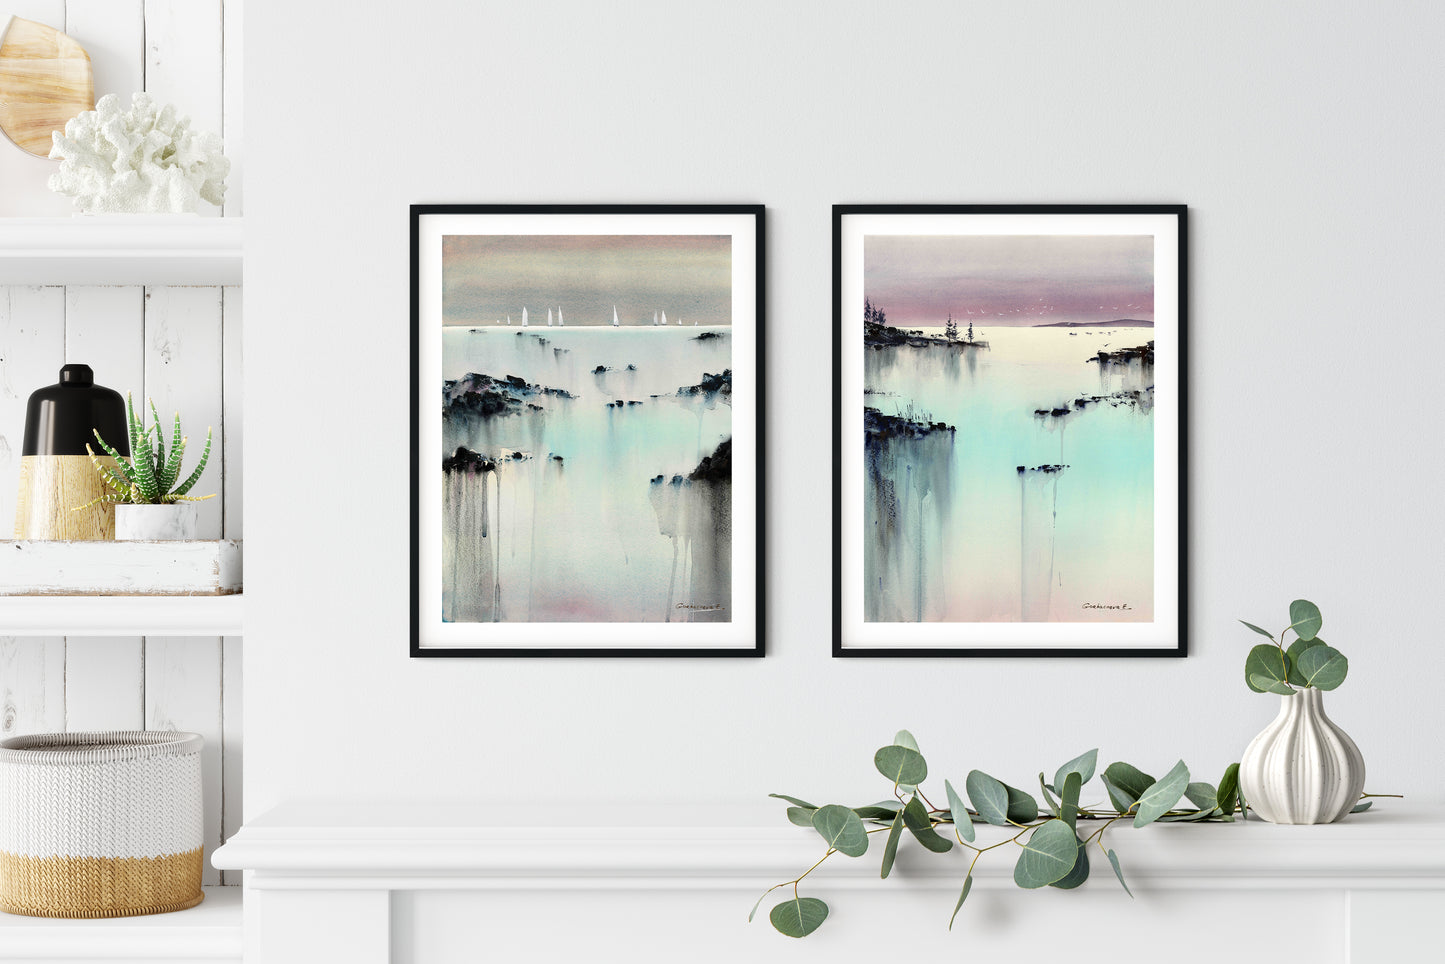 Abstract Art Set of 2 Pieces, Coastal Wall Prints, Modern Design Decor, Turquoise, Pink, Giclee Extra Large Canvas Print